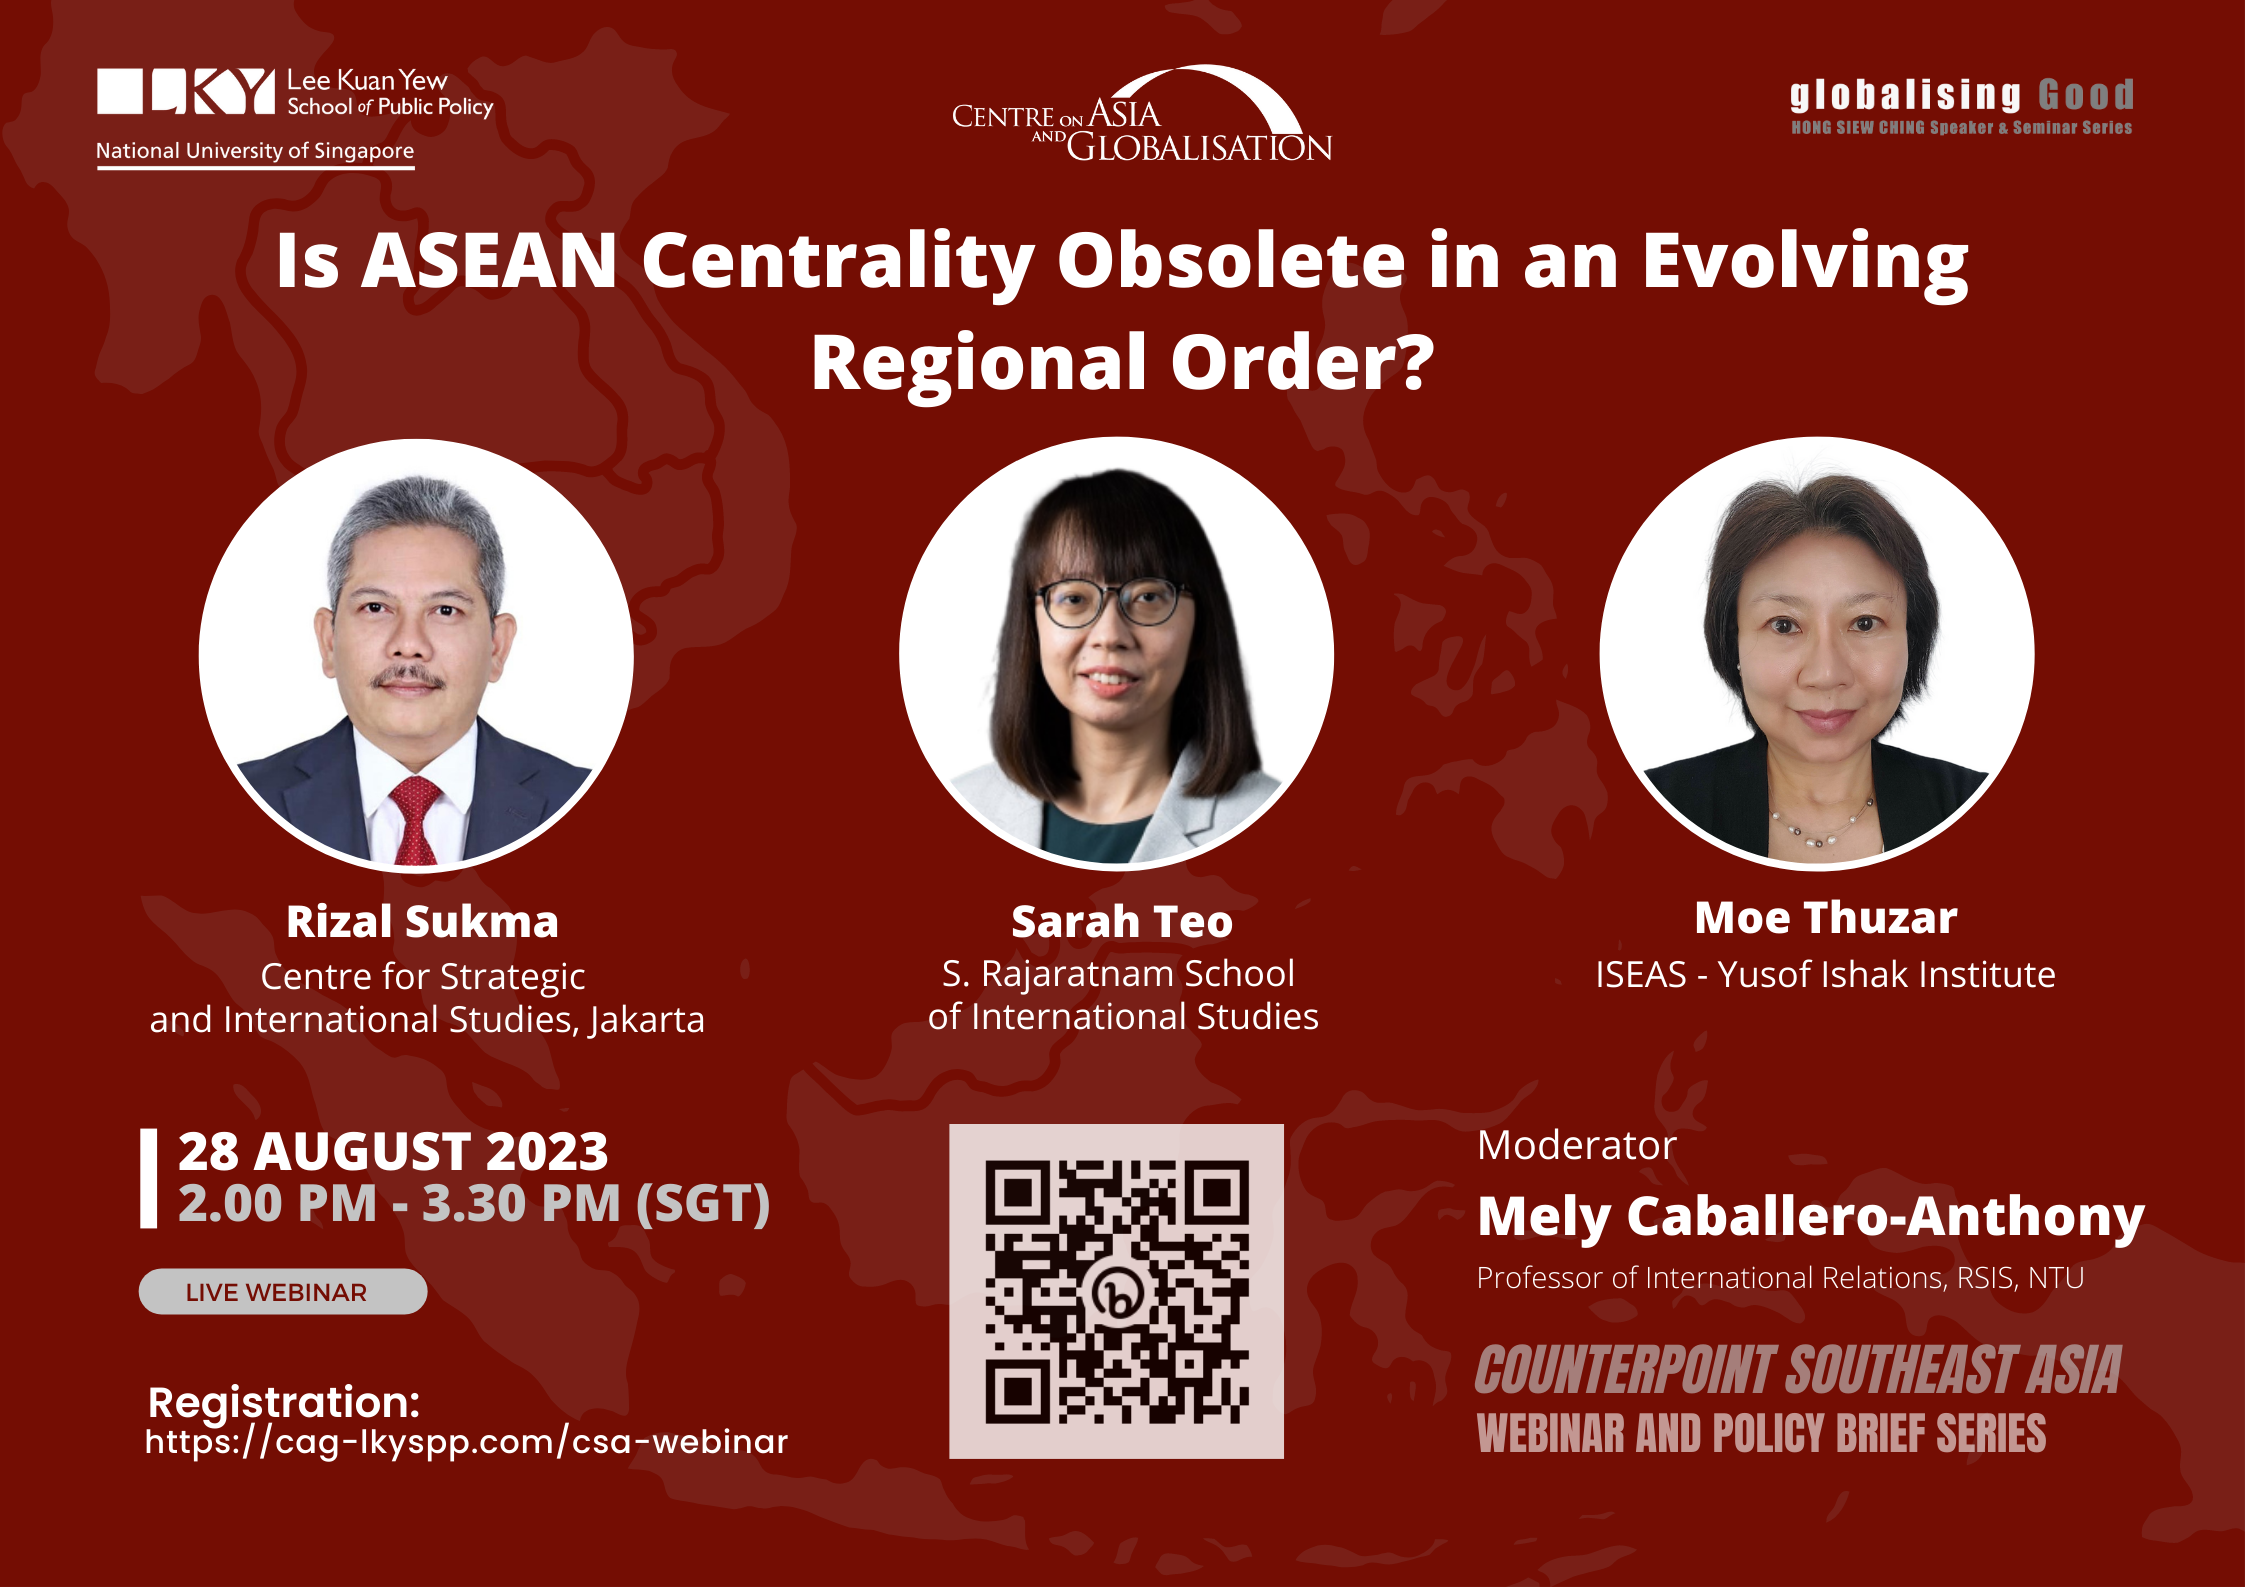 Is ASEAN Centrality Obsolete in an Evolving Regional Order?